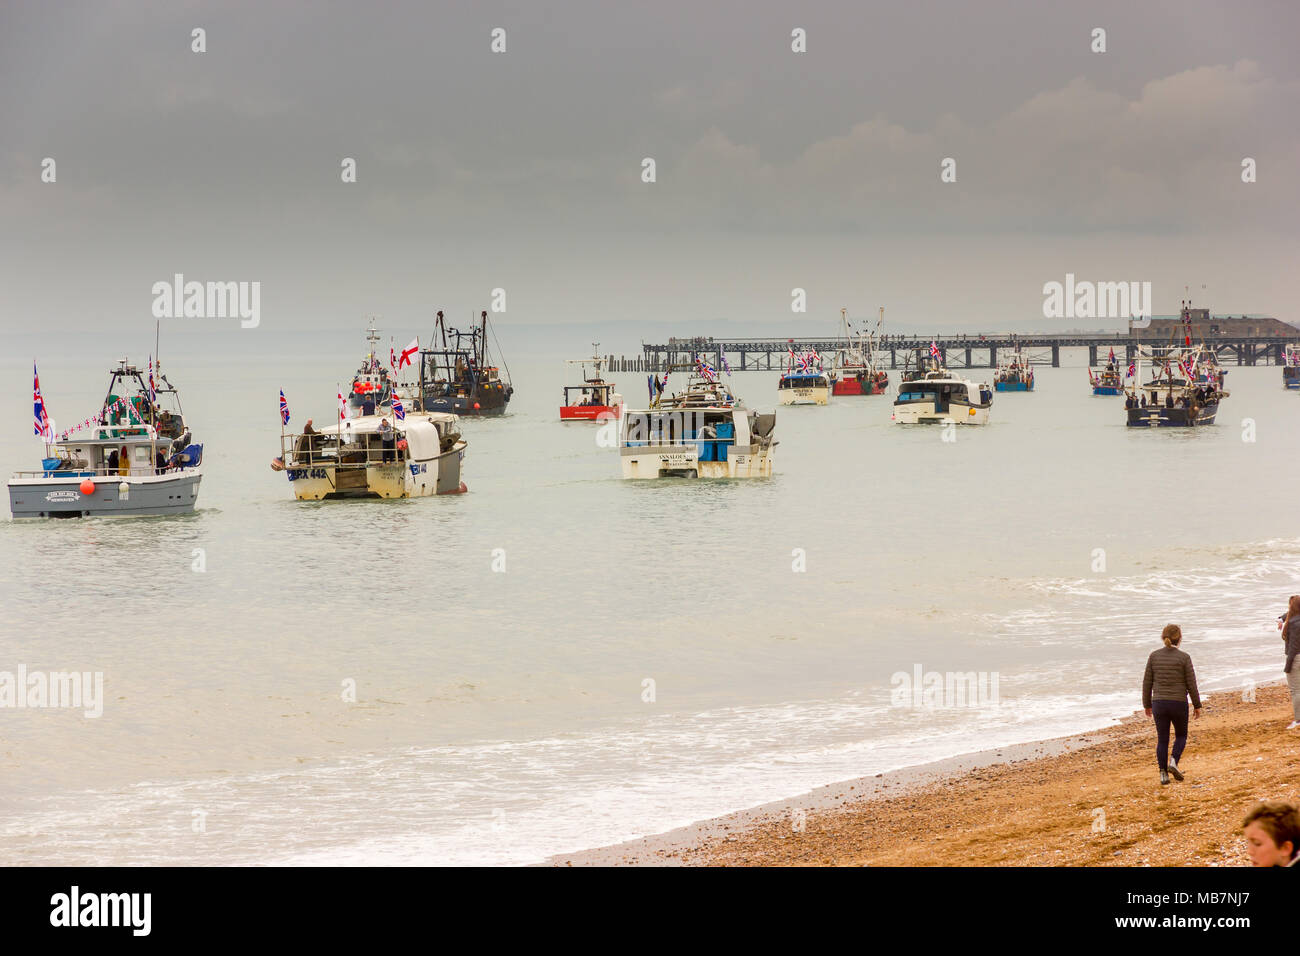 Hasting, East Sussex, UK. 8th April 2018. Fisherman from the South Coast fishing ports of Hastings, Newhaven, Rye and Eastbourne gather at Hastings to protest at the Governments decision not to take back full control of British waters when the UK leaves the EU next year. The Department for Environment, Food and Rural Affairs said it believed a transition deal until 2021 would safeguard fishing communities. Credit: Alan Fraser Stock Photo